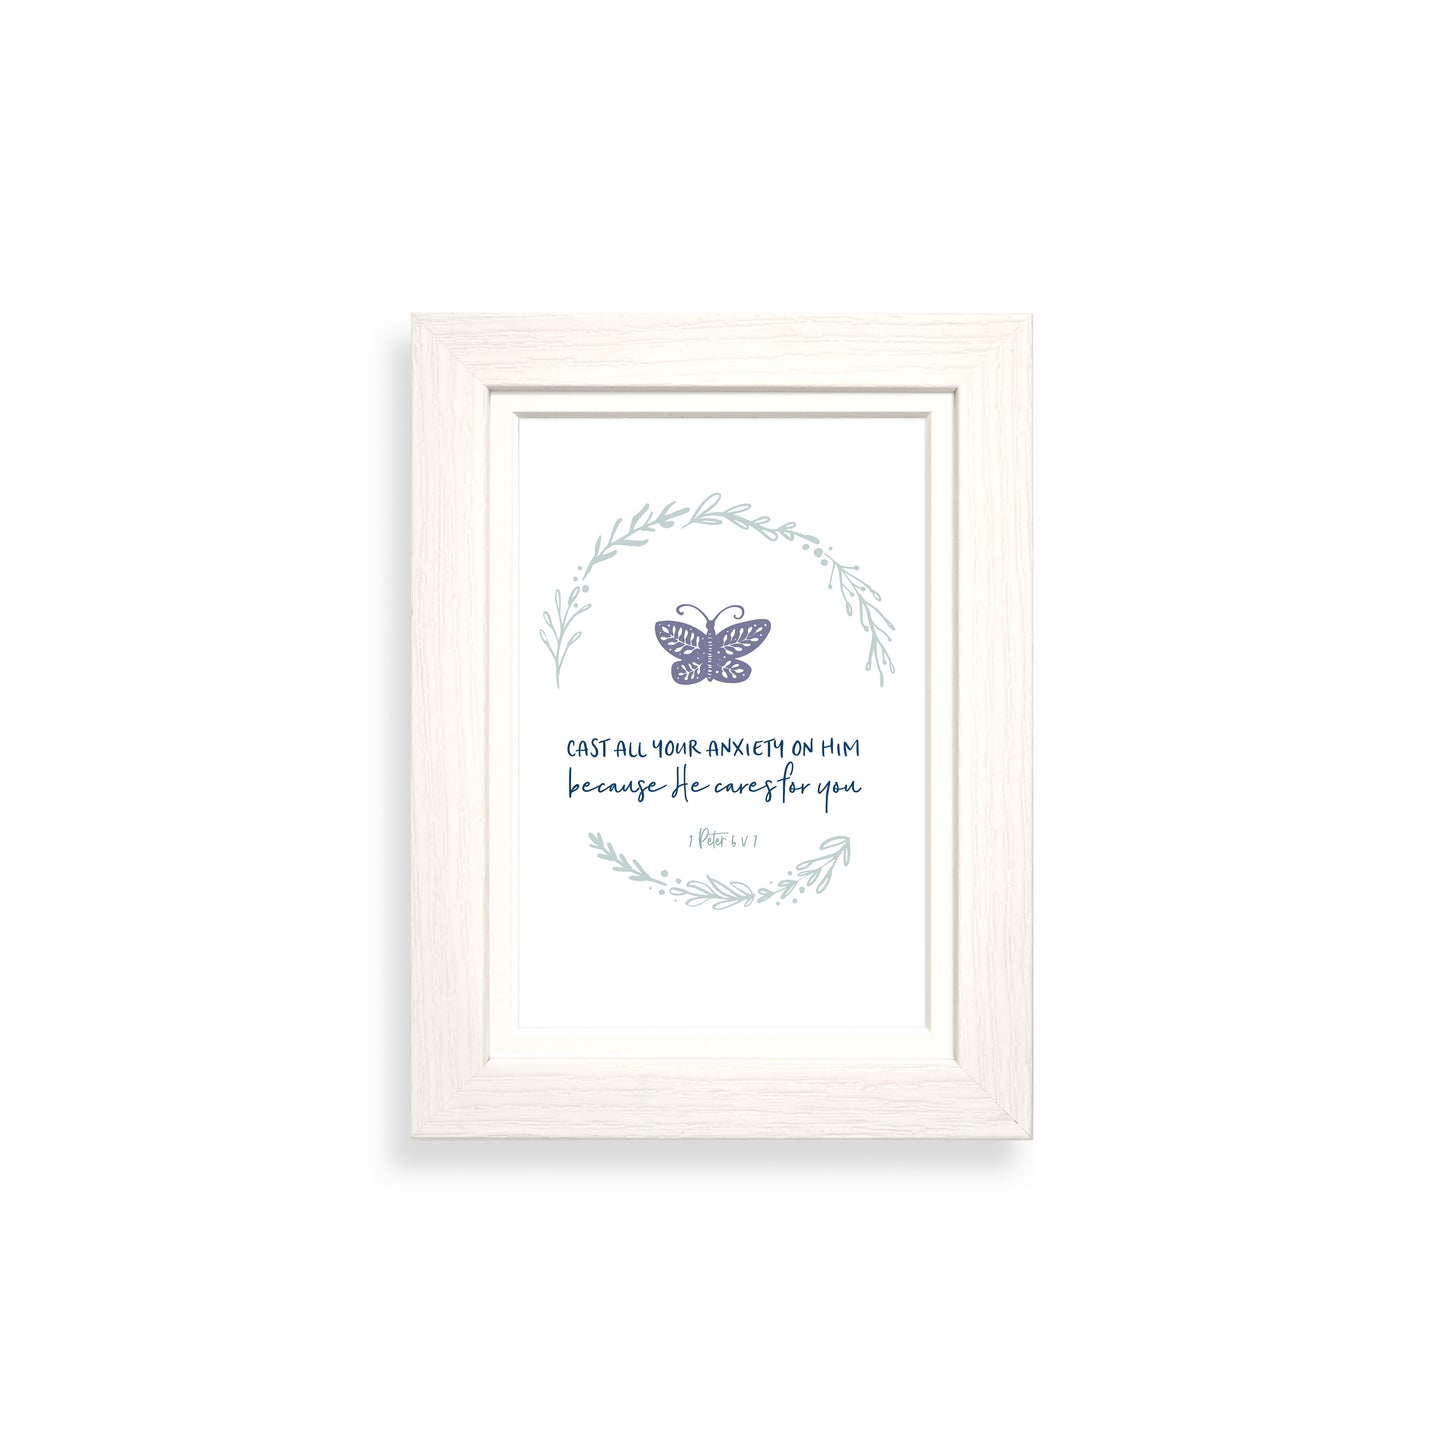 Cast all your anxiety on Him because He cares for you framed print